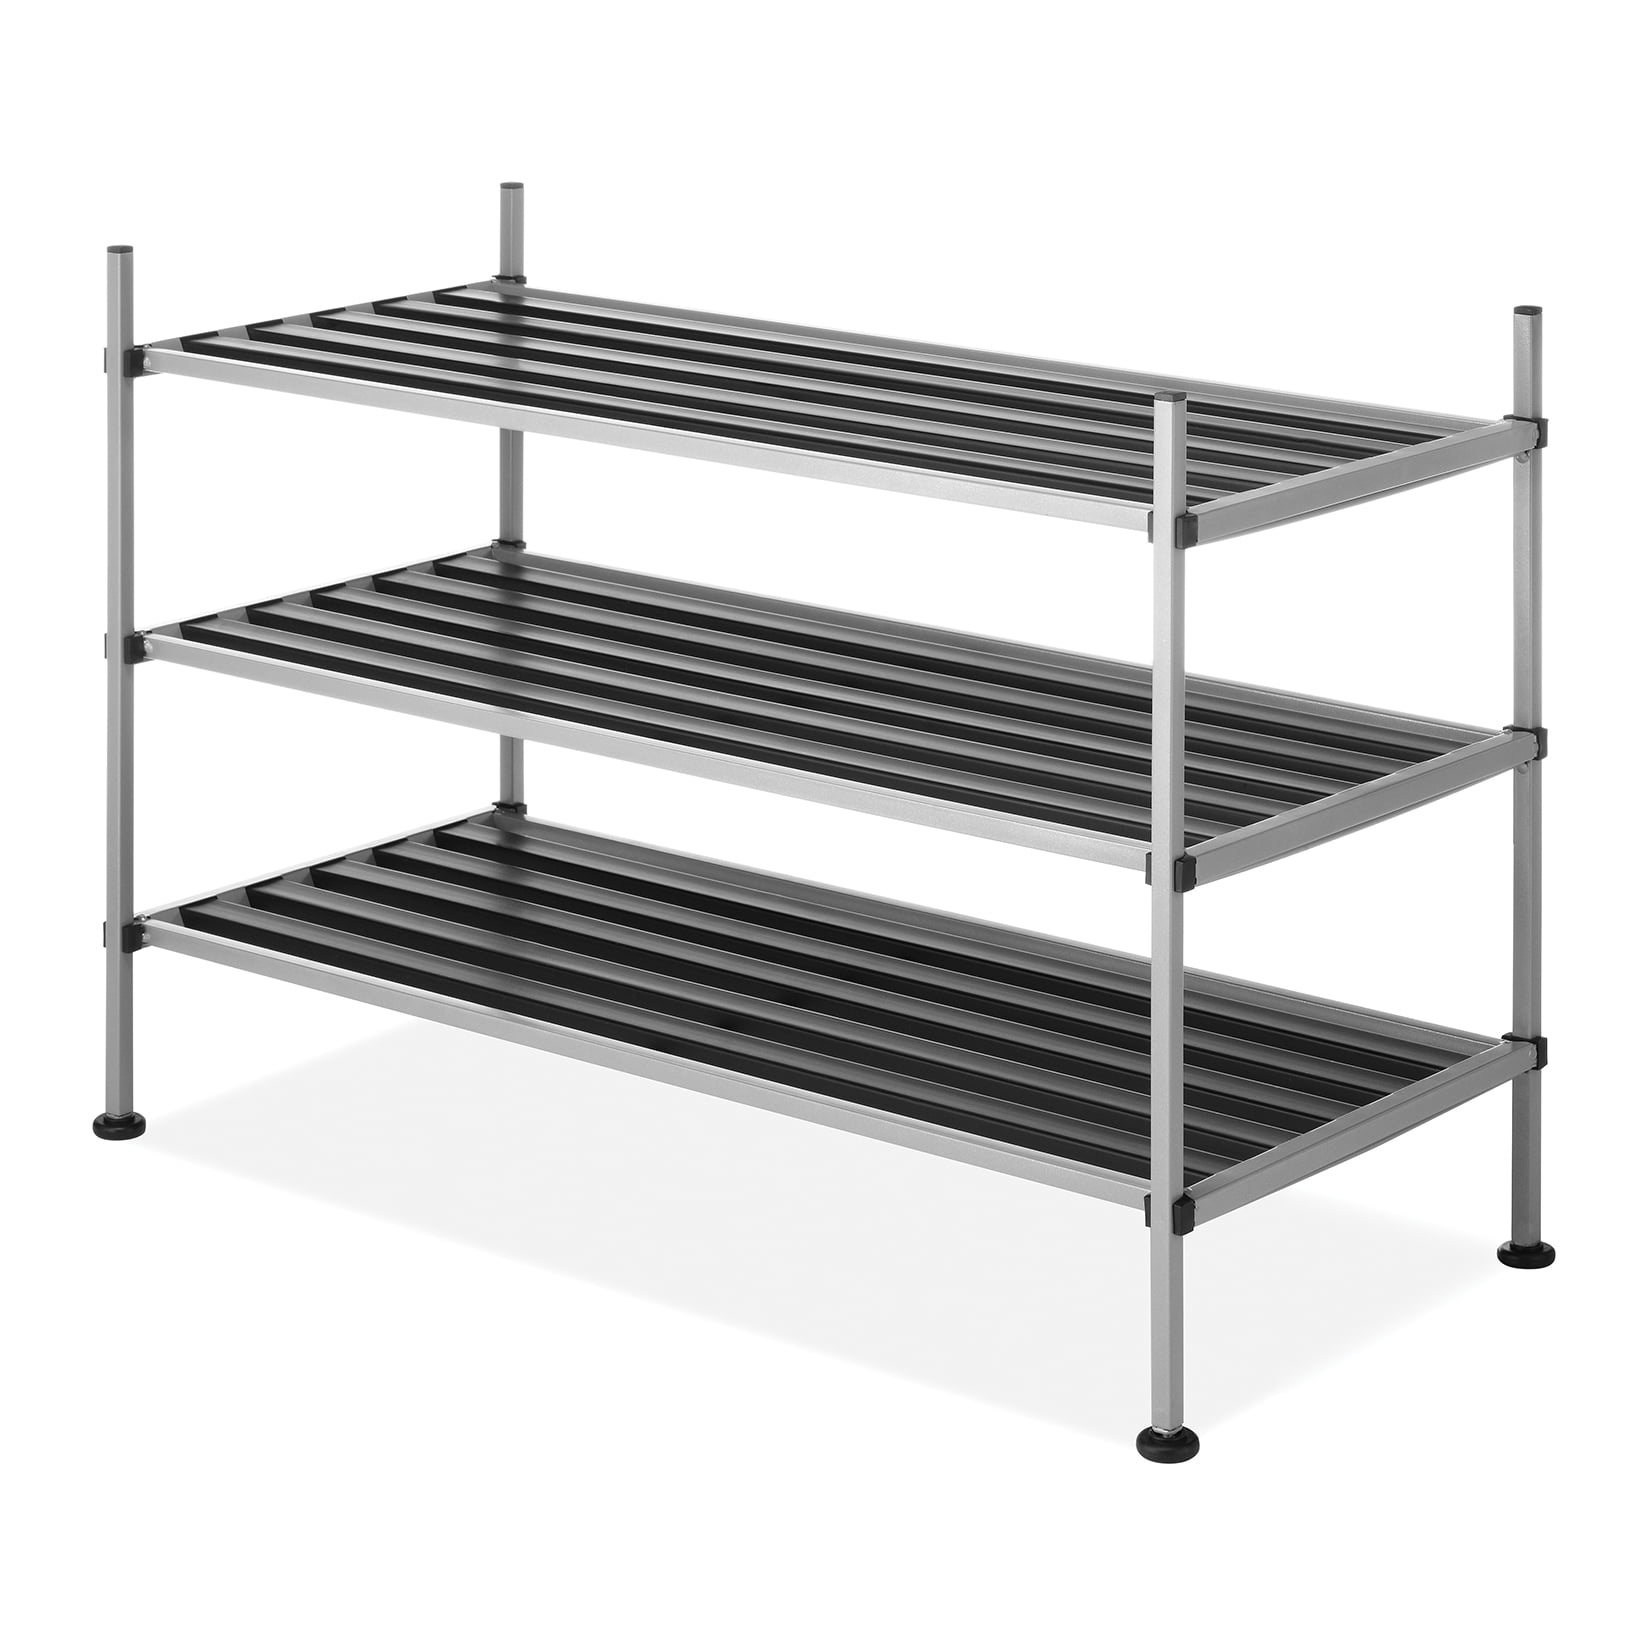 from US Warehouse White HP95 Book Rack Simple Floor Standing Bedroom Shelf 3-Tier Simple Assembly Rack Shelf Storage Organizer for Folder Books Magazine Plant and Others 